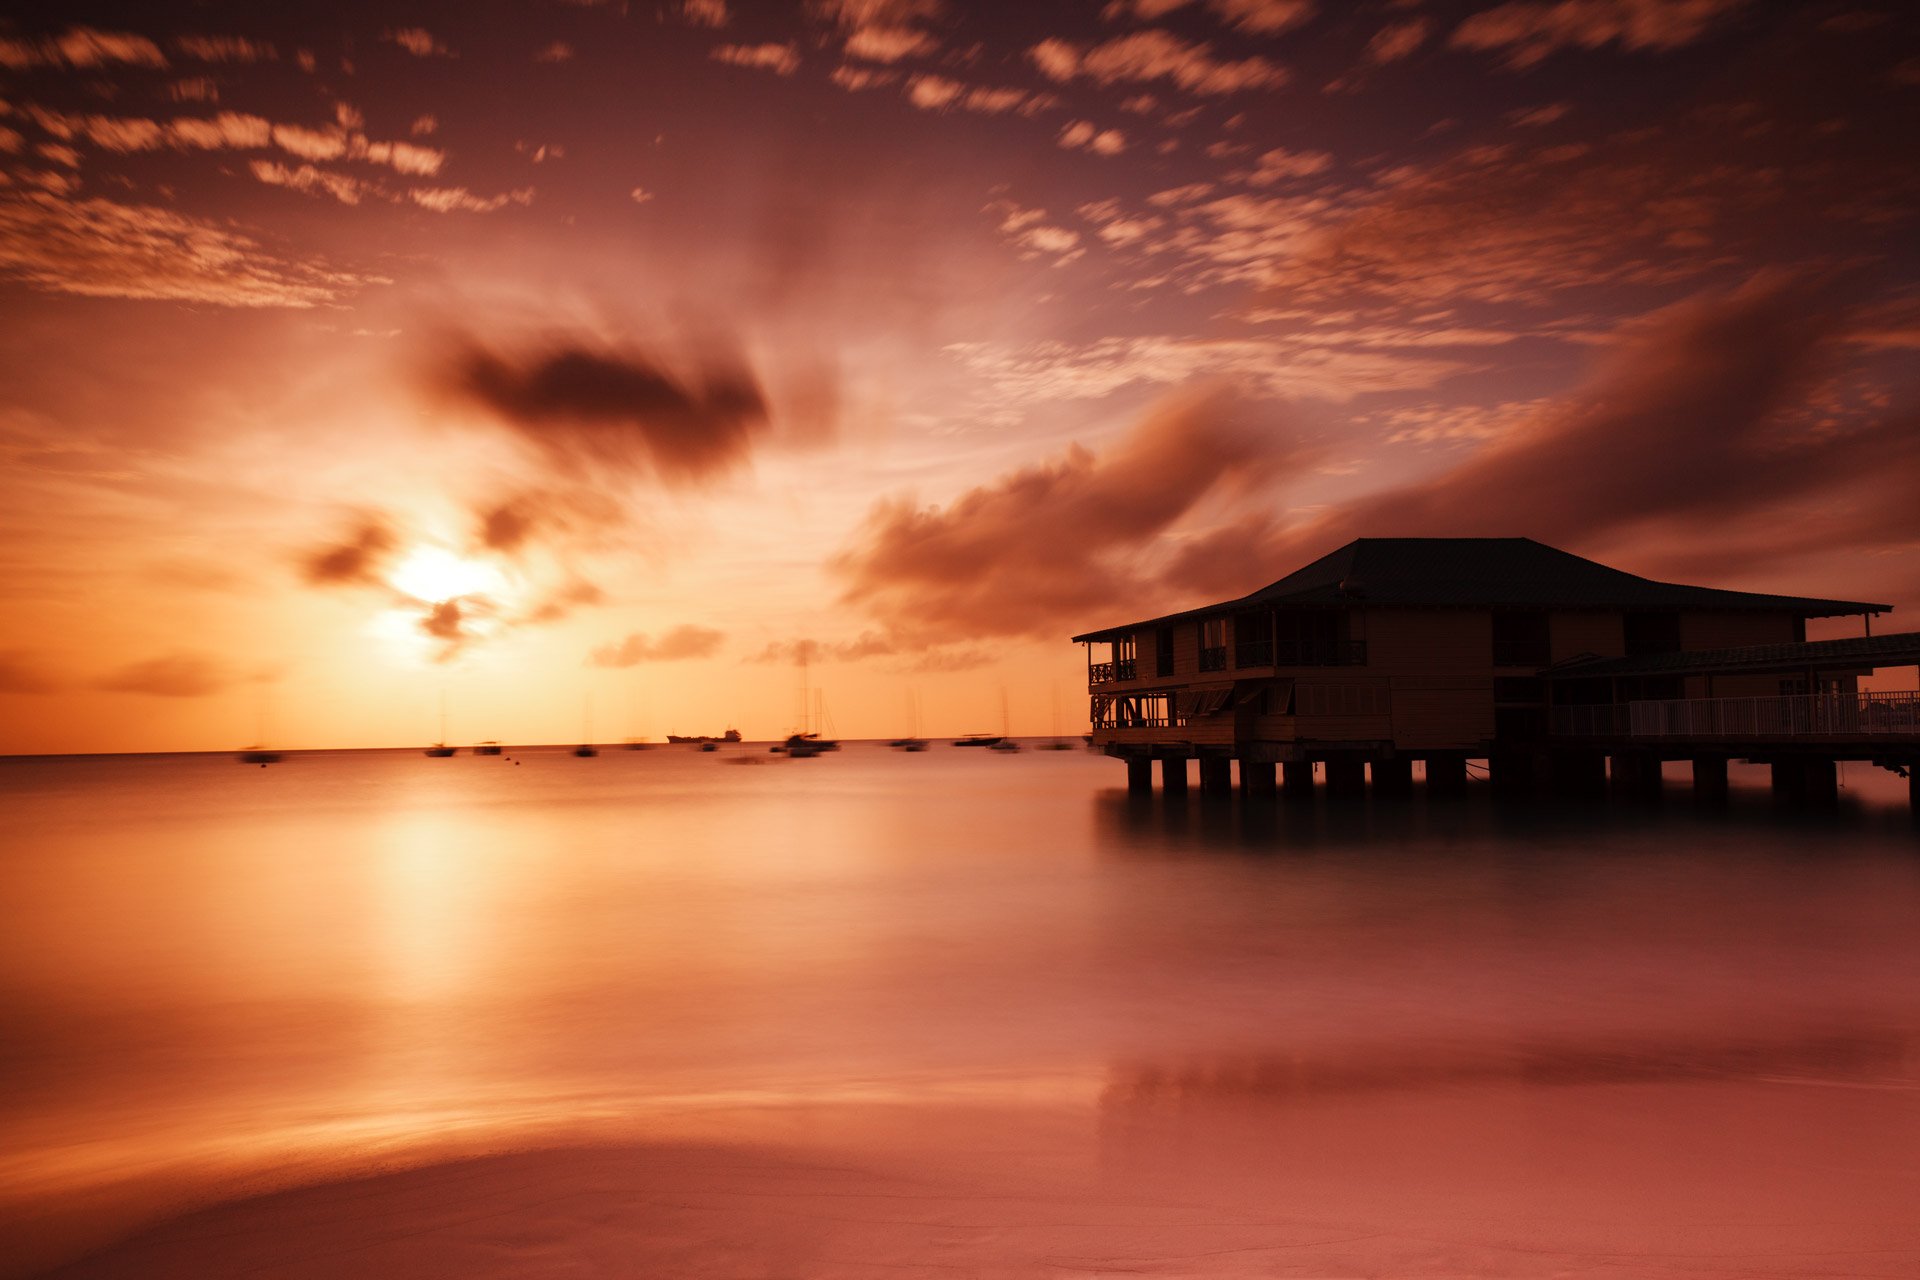 Download Building Photography Sunset  HD Wallpaper by Petr Kratochvil